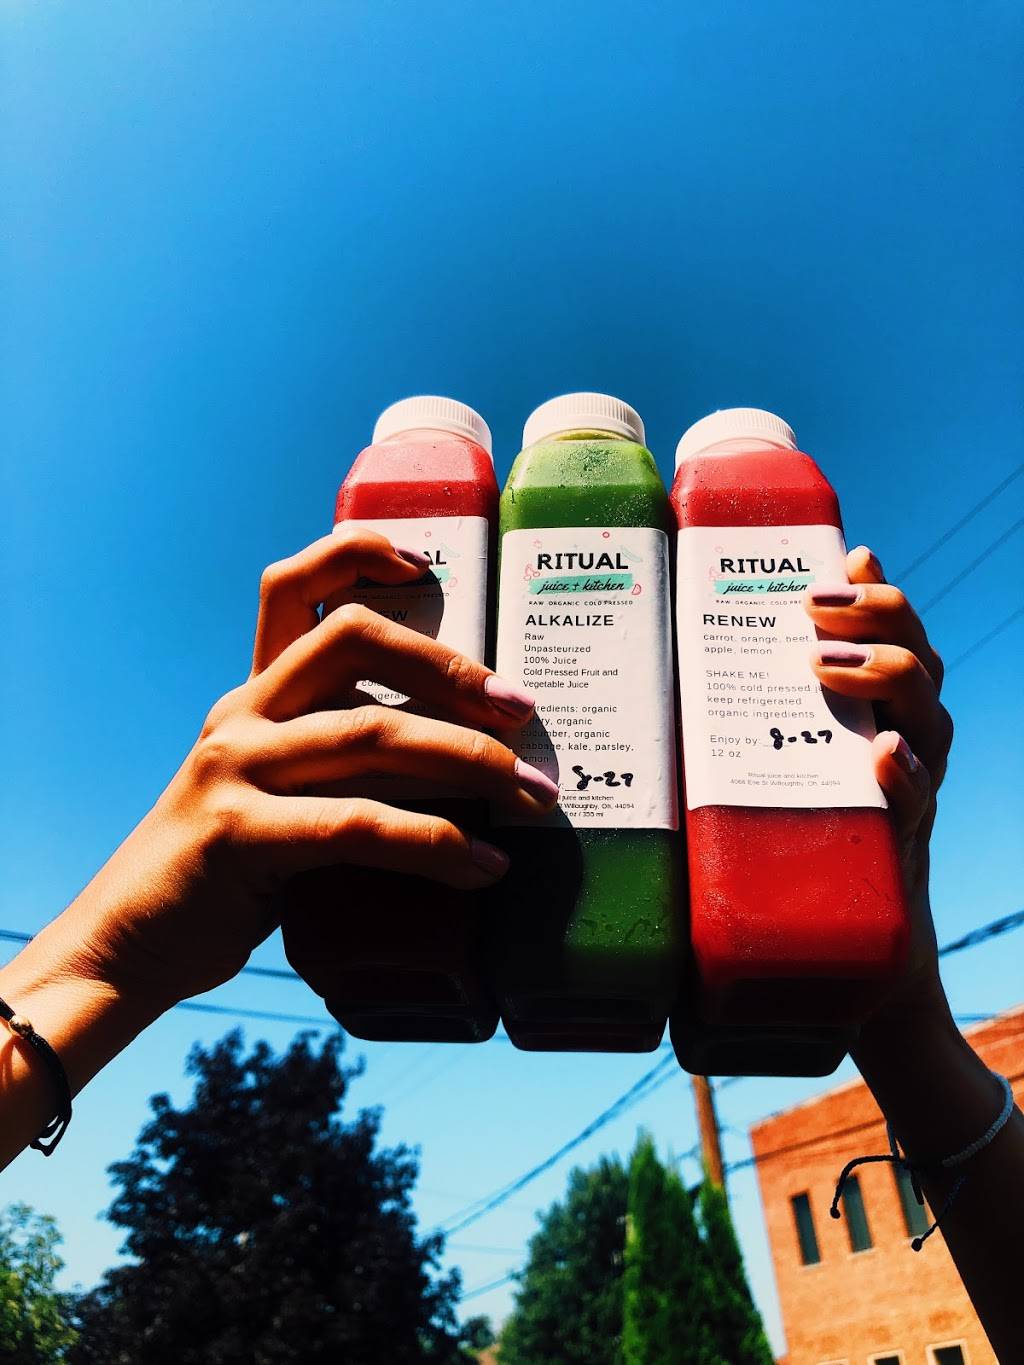 Ritual Juicery | restaurant | 15619 Waterloo Rd, Cleveland, OH 44110, USA